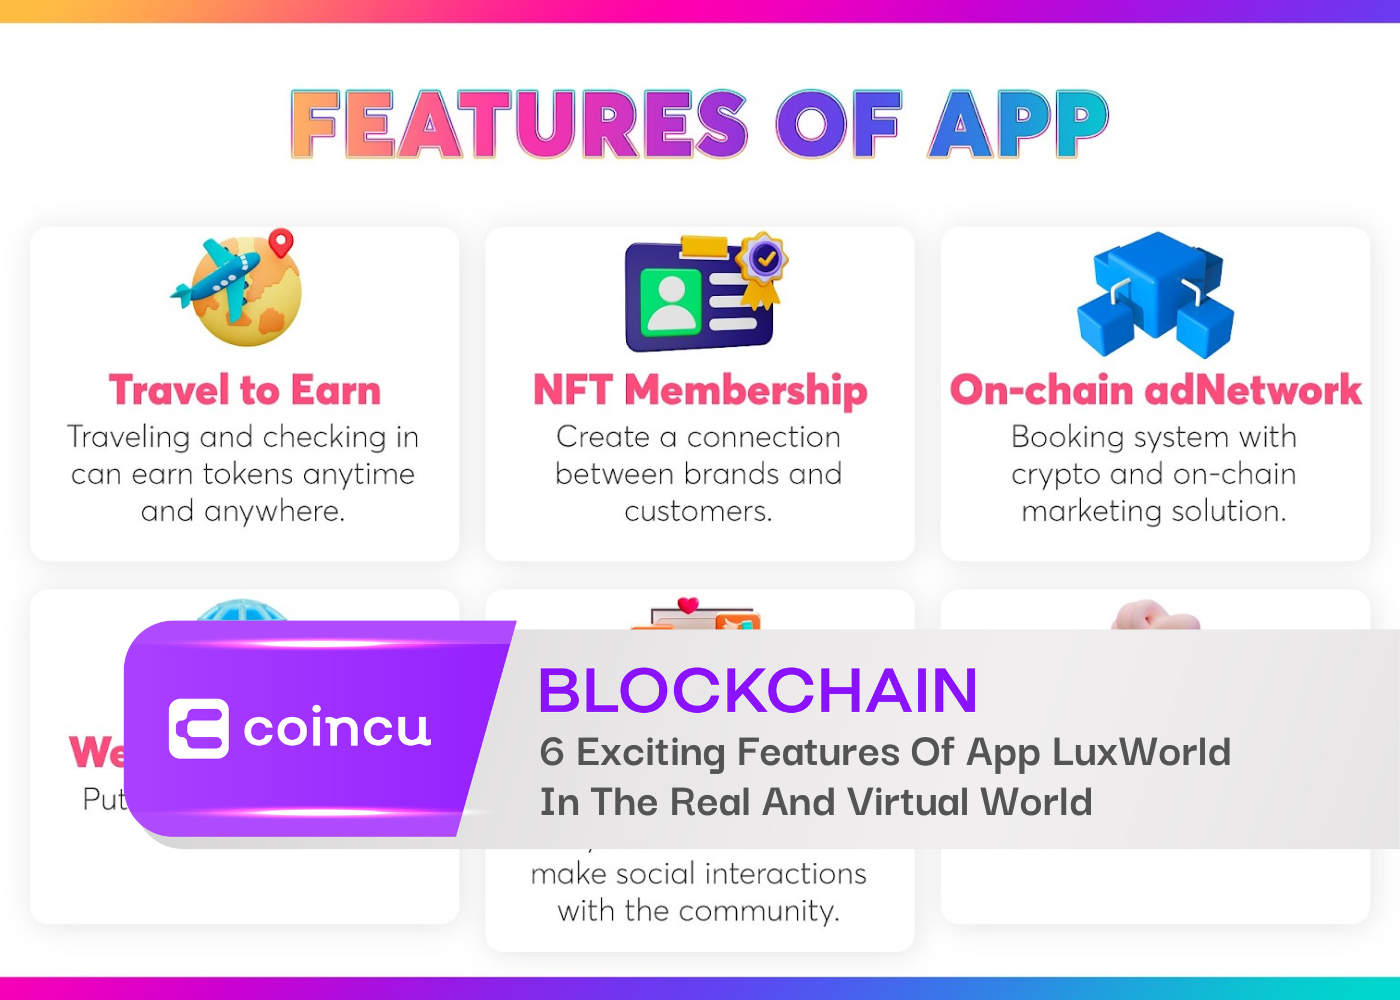 6 Exciting Features Of App LuxWorld In The Real And Virtual World